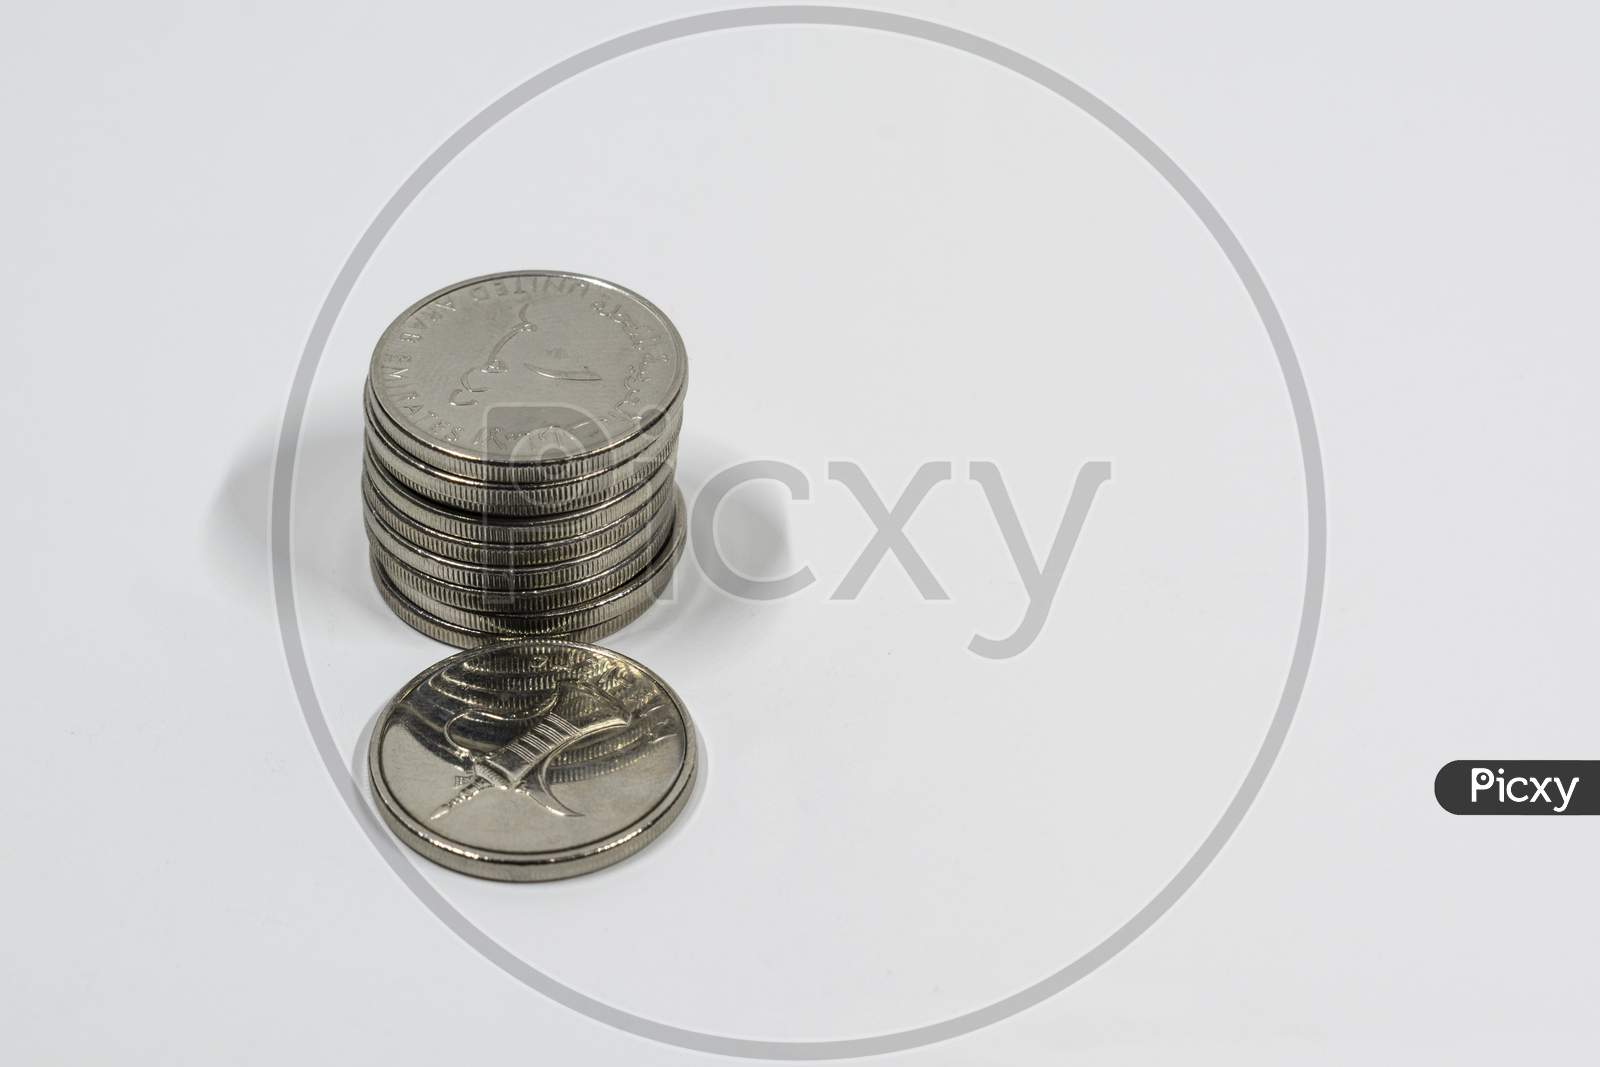 A Close Up View Of United Arab Emirates Coin With White Background, Fils, Uae Currency, Uae Coins, Fils